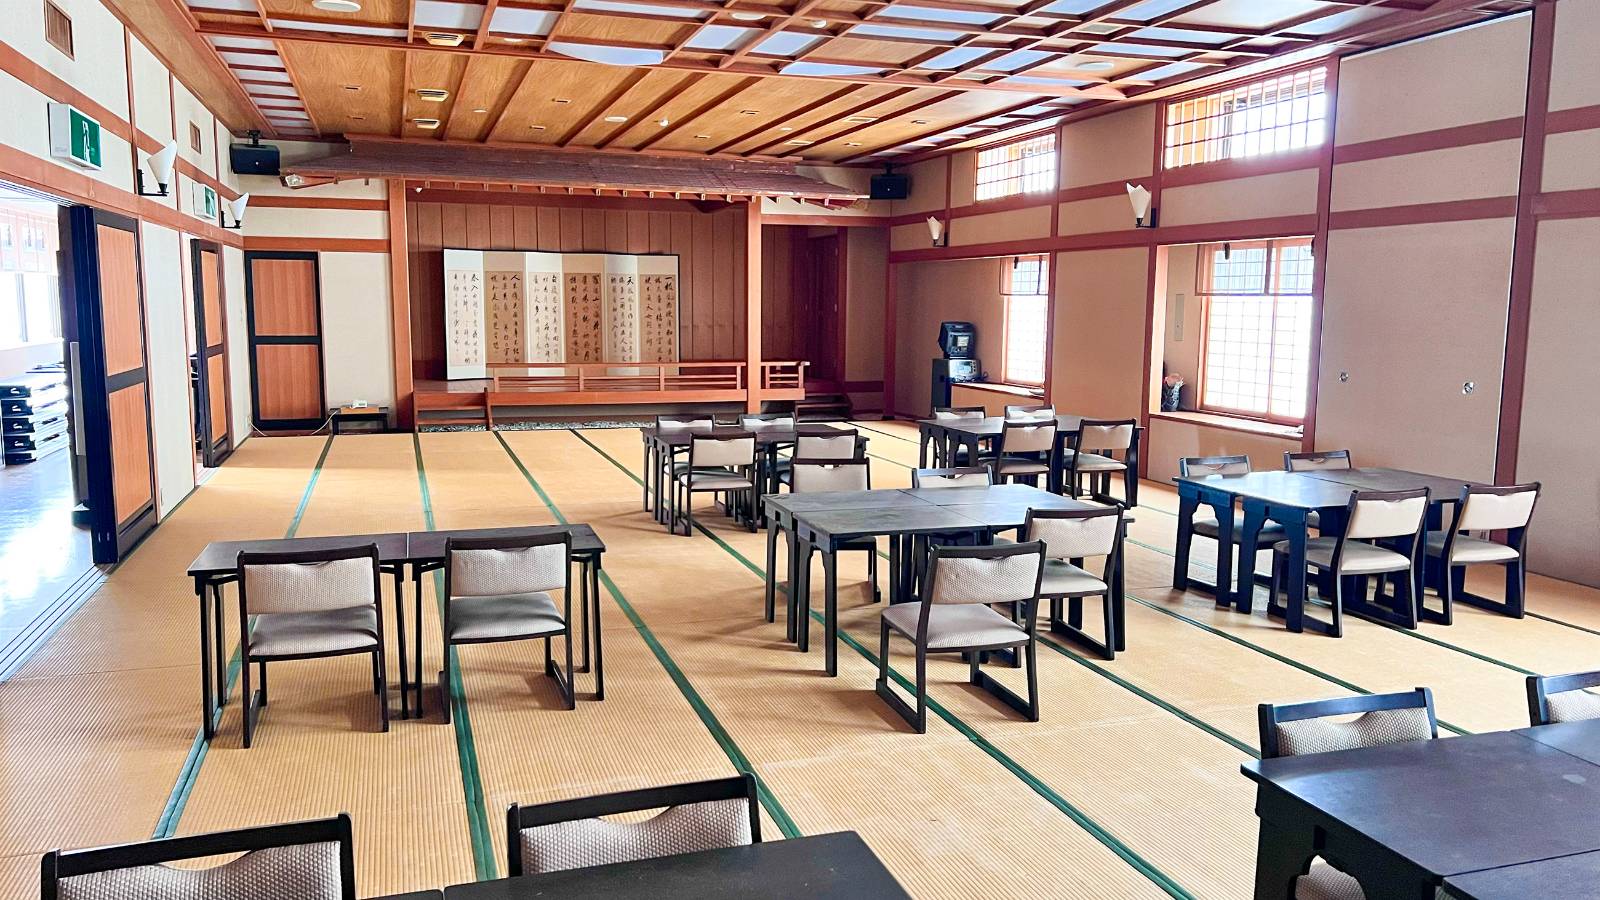 Large enkai room that is used for parties and dining.